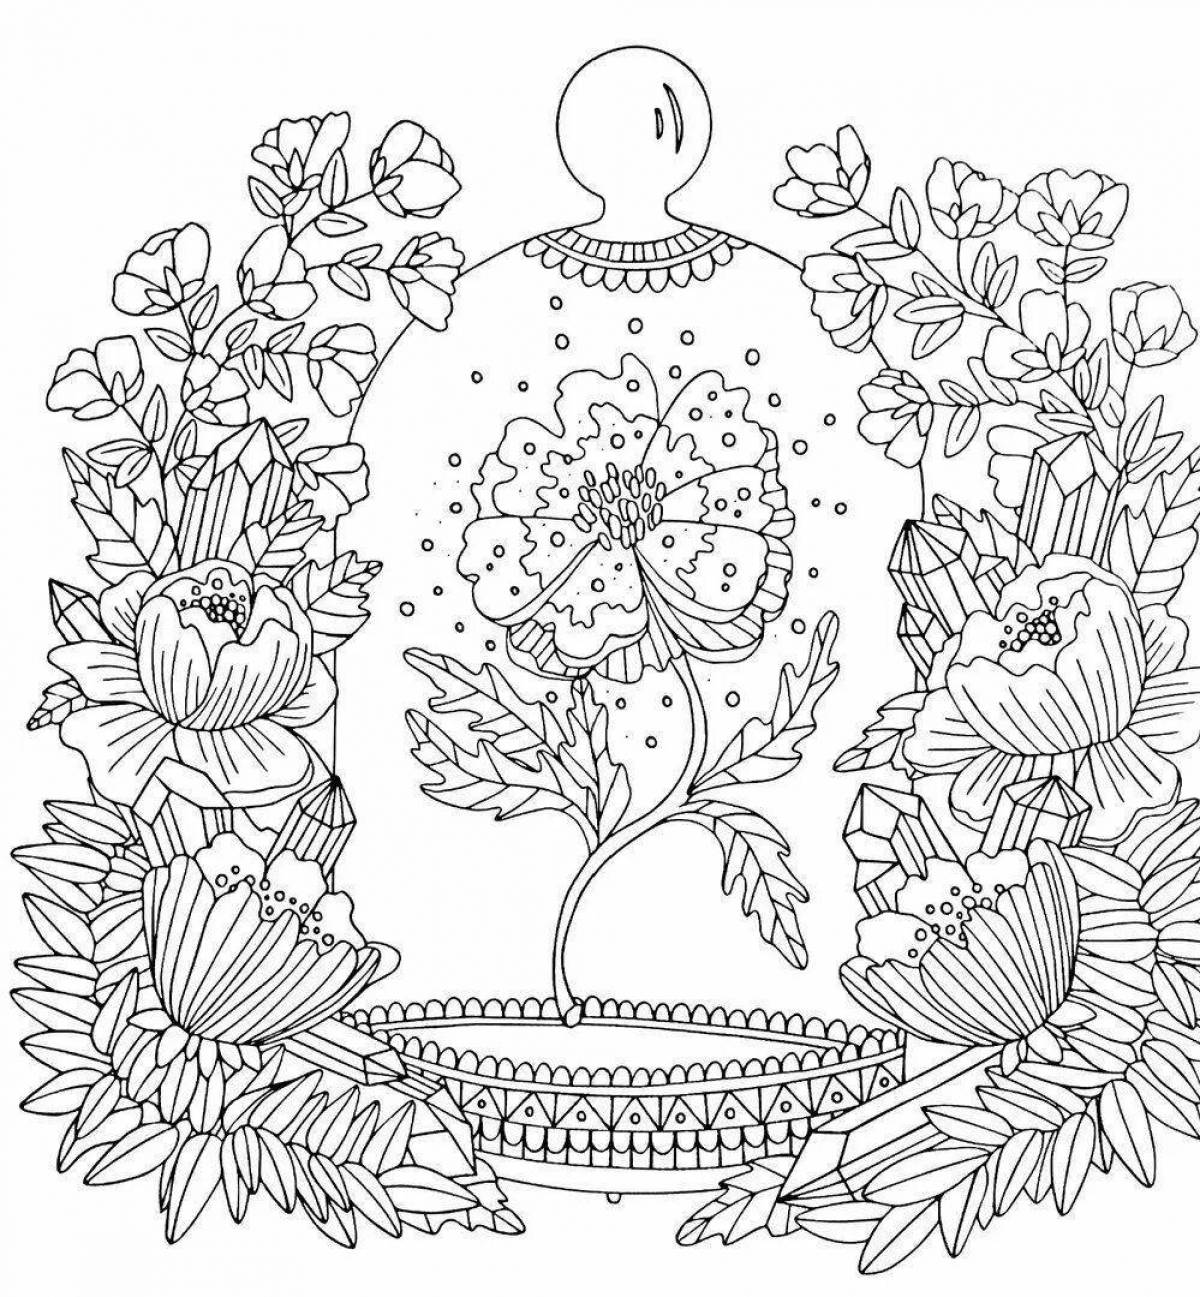 Peaceful coloring book for adults